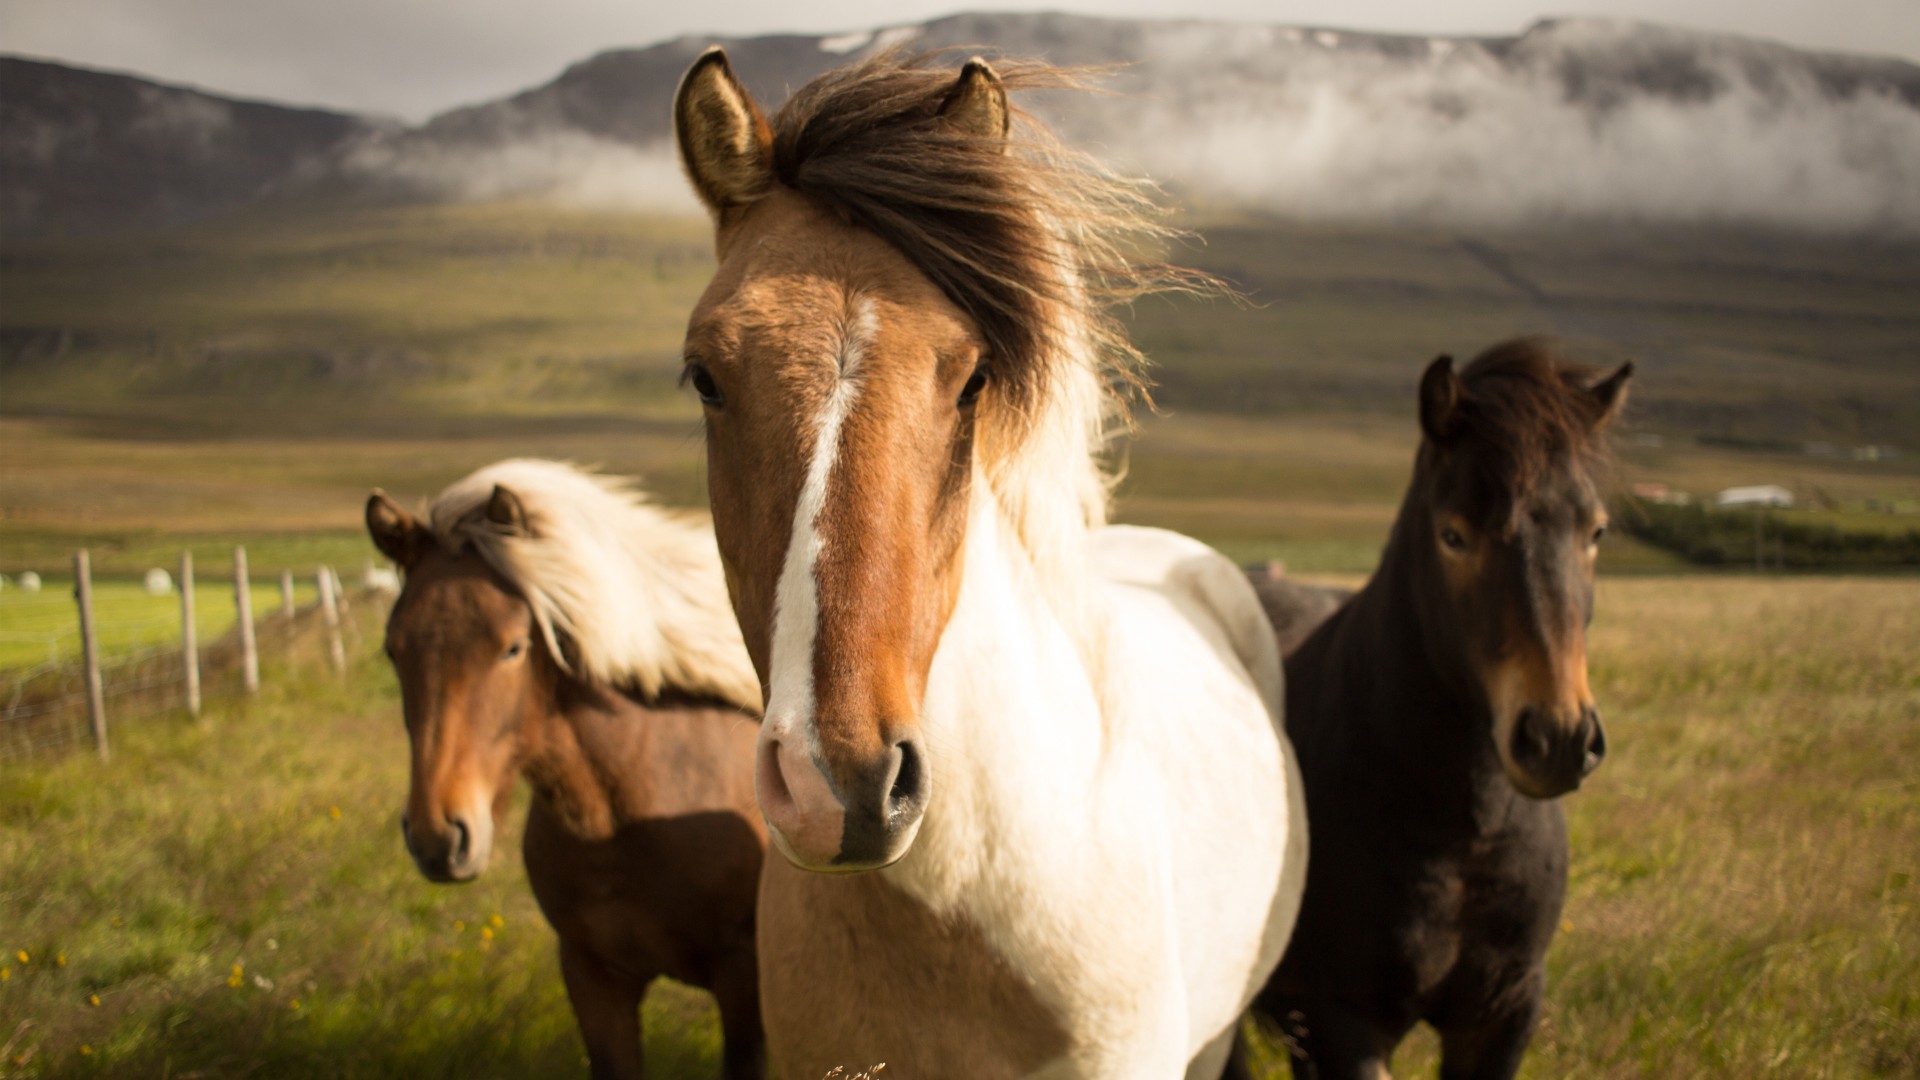 Iceland Horses Hd Wallpaper - Black White And Brown Horse - HD Wallpaper 